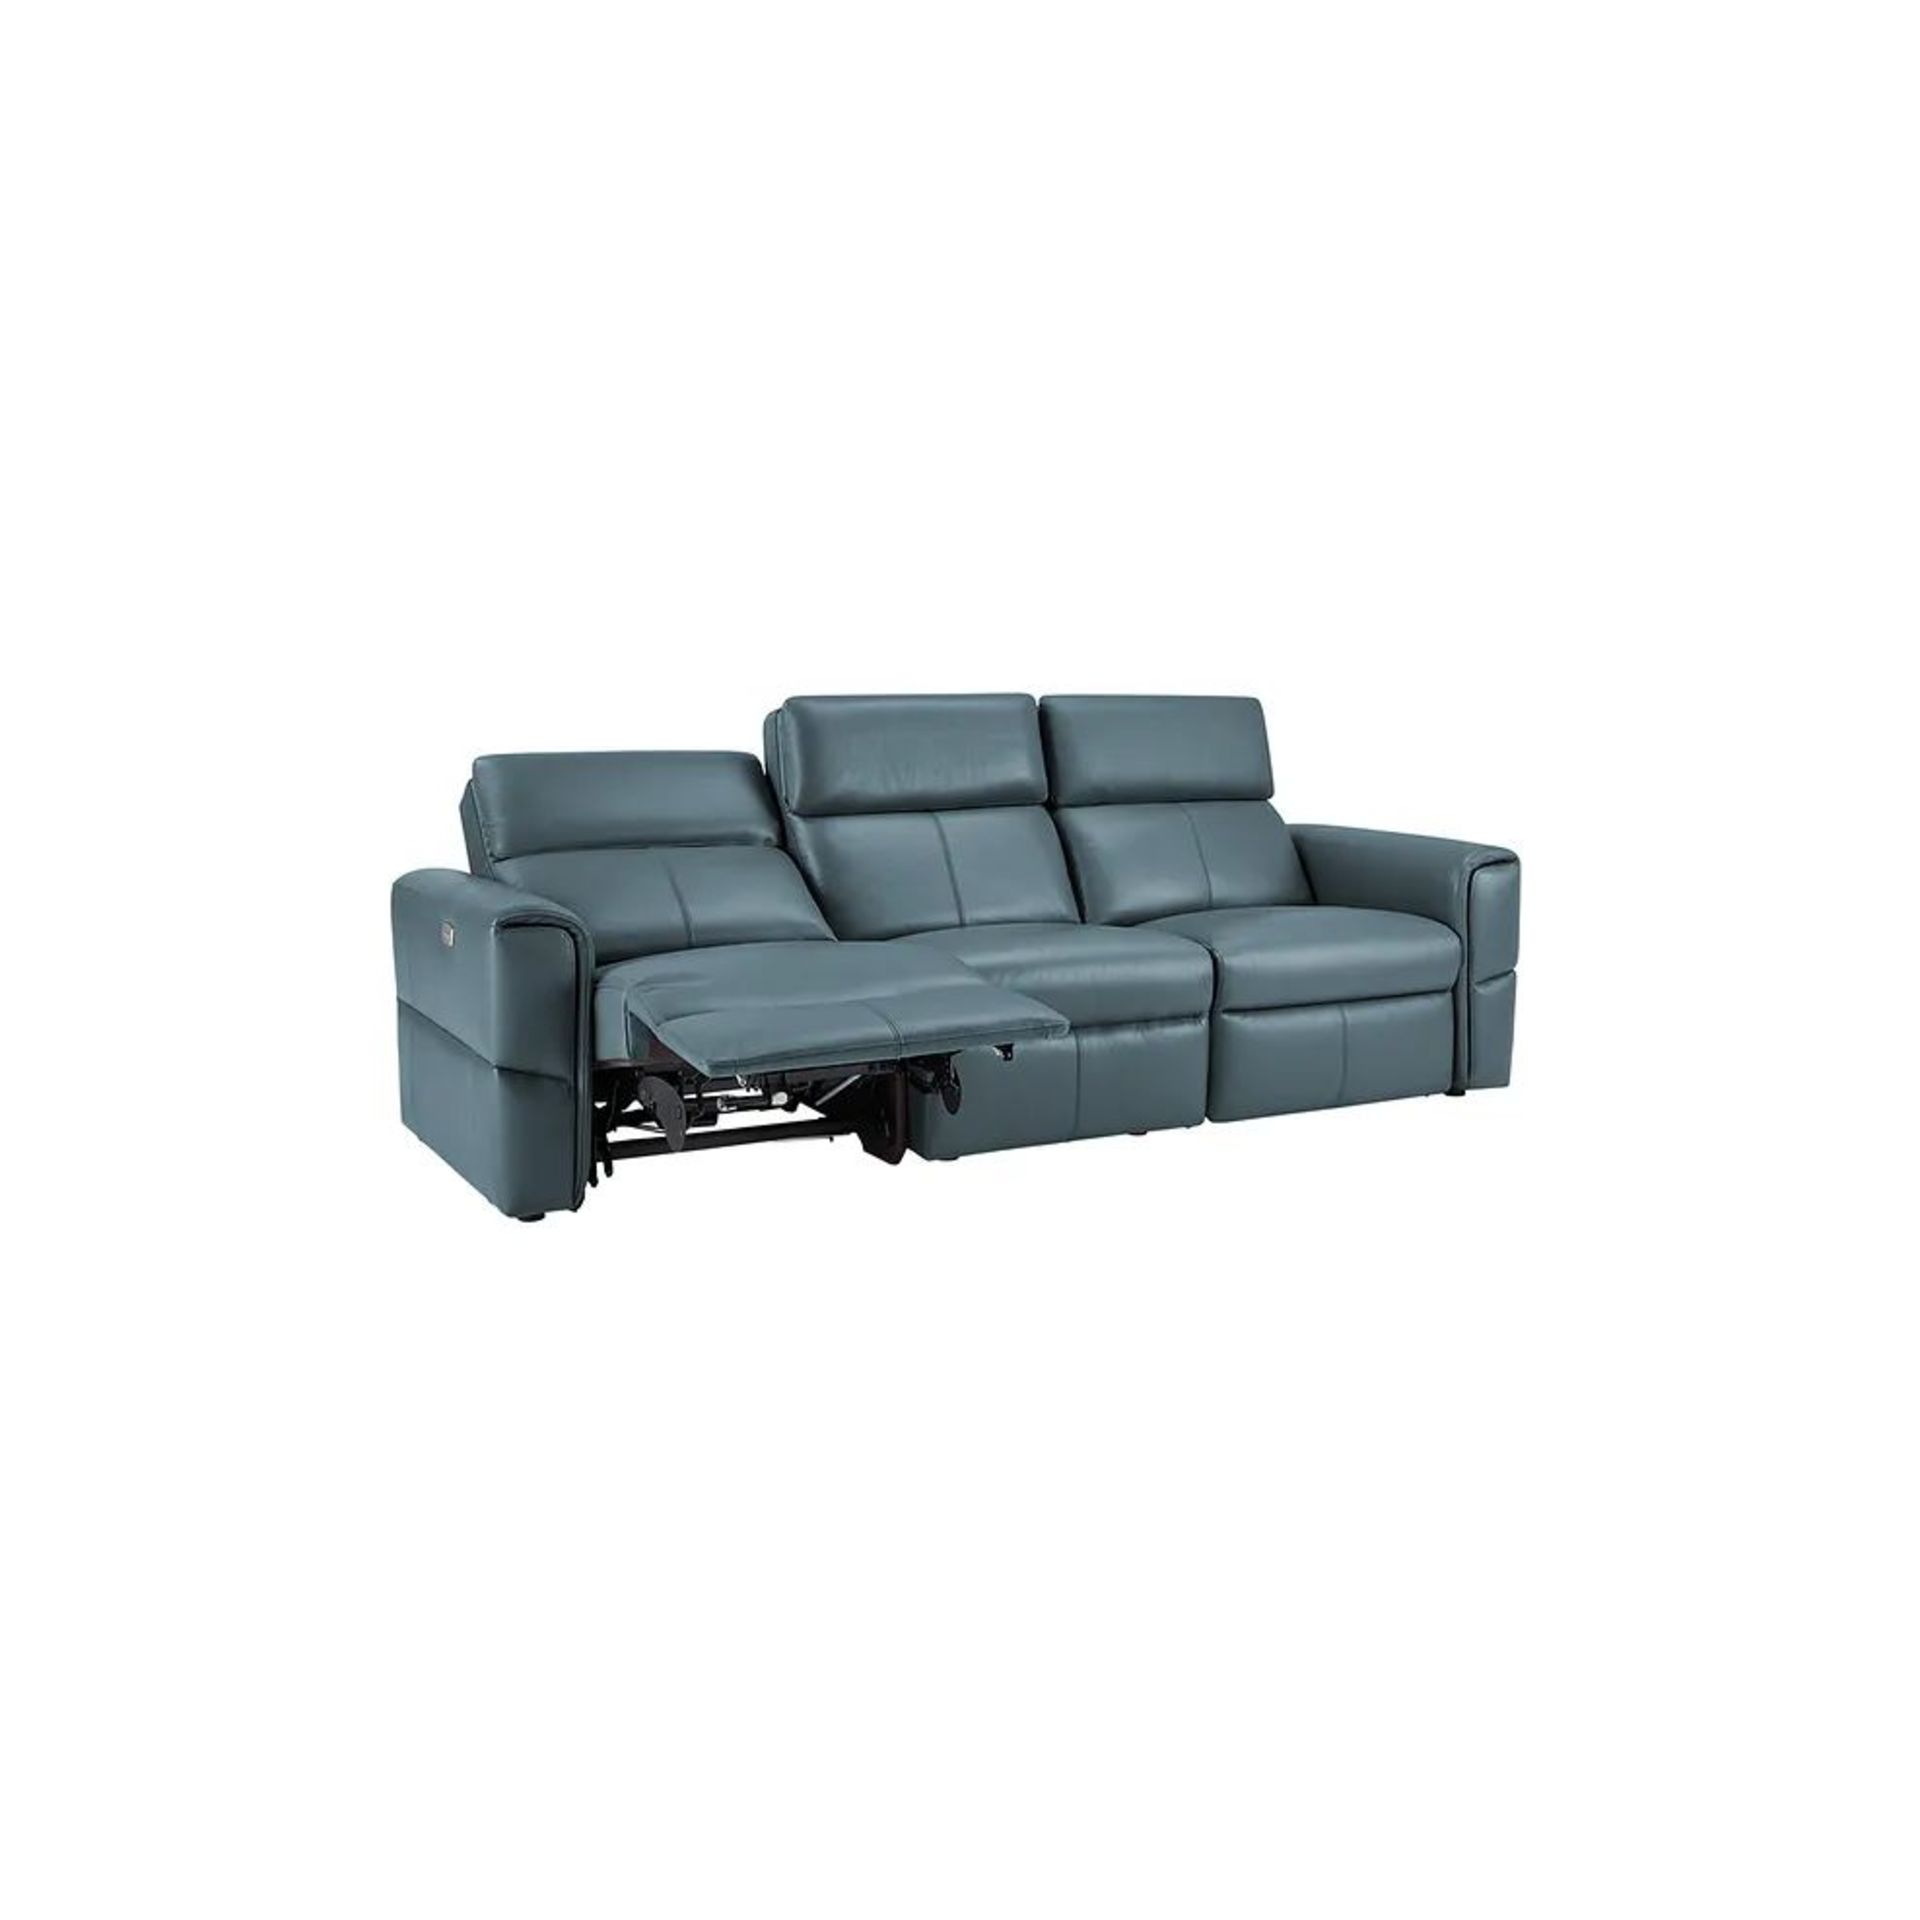 BRAND NEW SAMSON Modular 3 Seat Electric Recliner -LIGHT BLUE LEATHER. RRP £1950. Showcasing neat, - Image 4 of 11